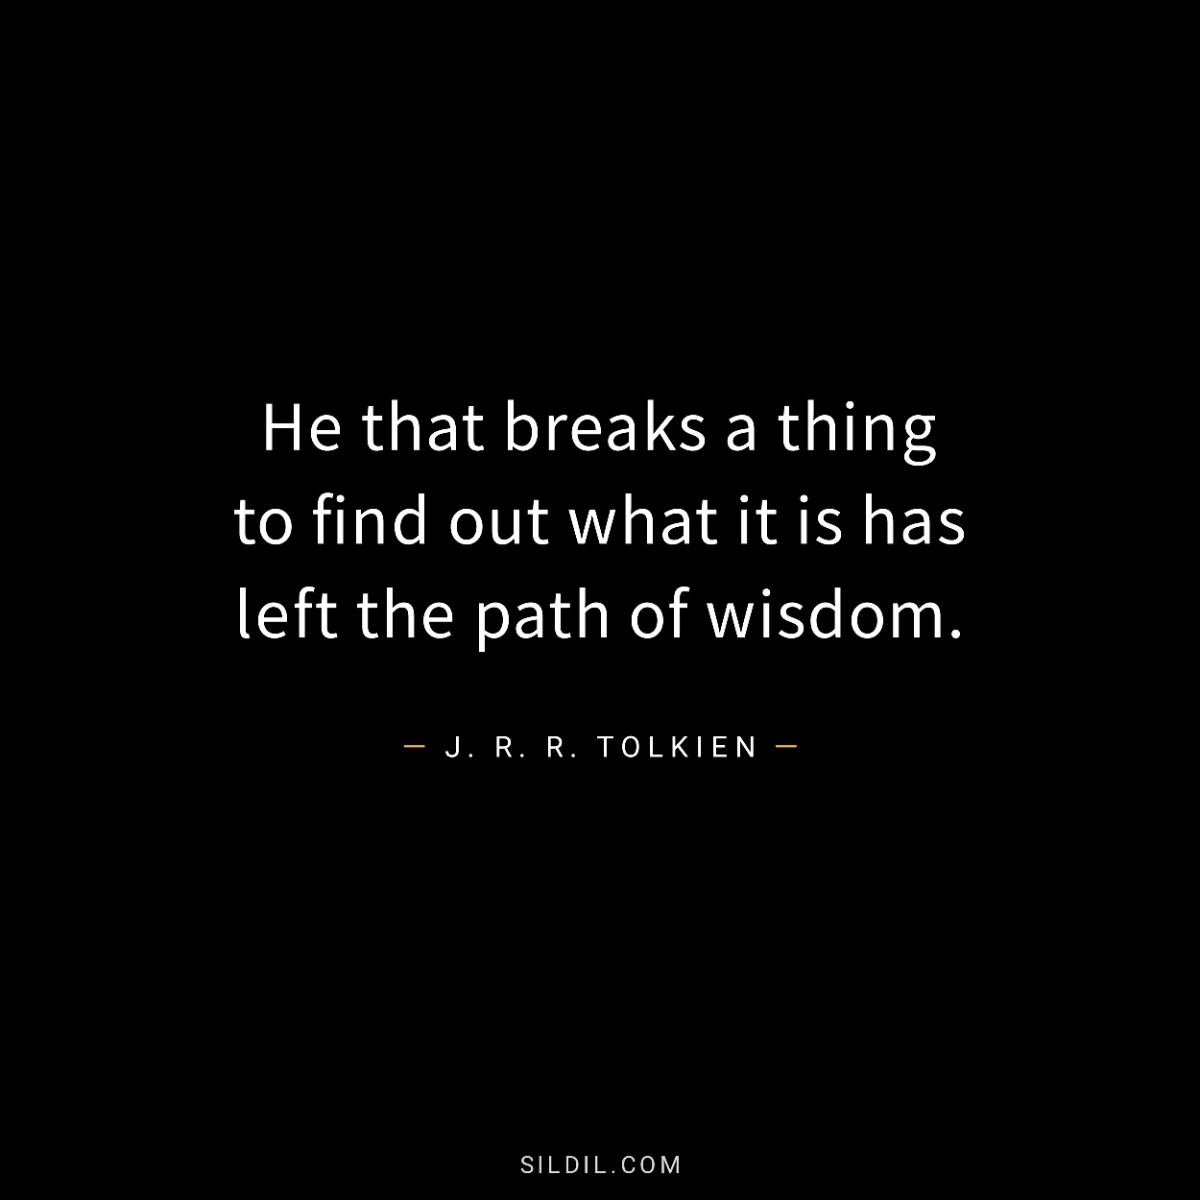 He that breaks a thing to find out what it is has left the path of wisdom.